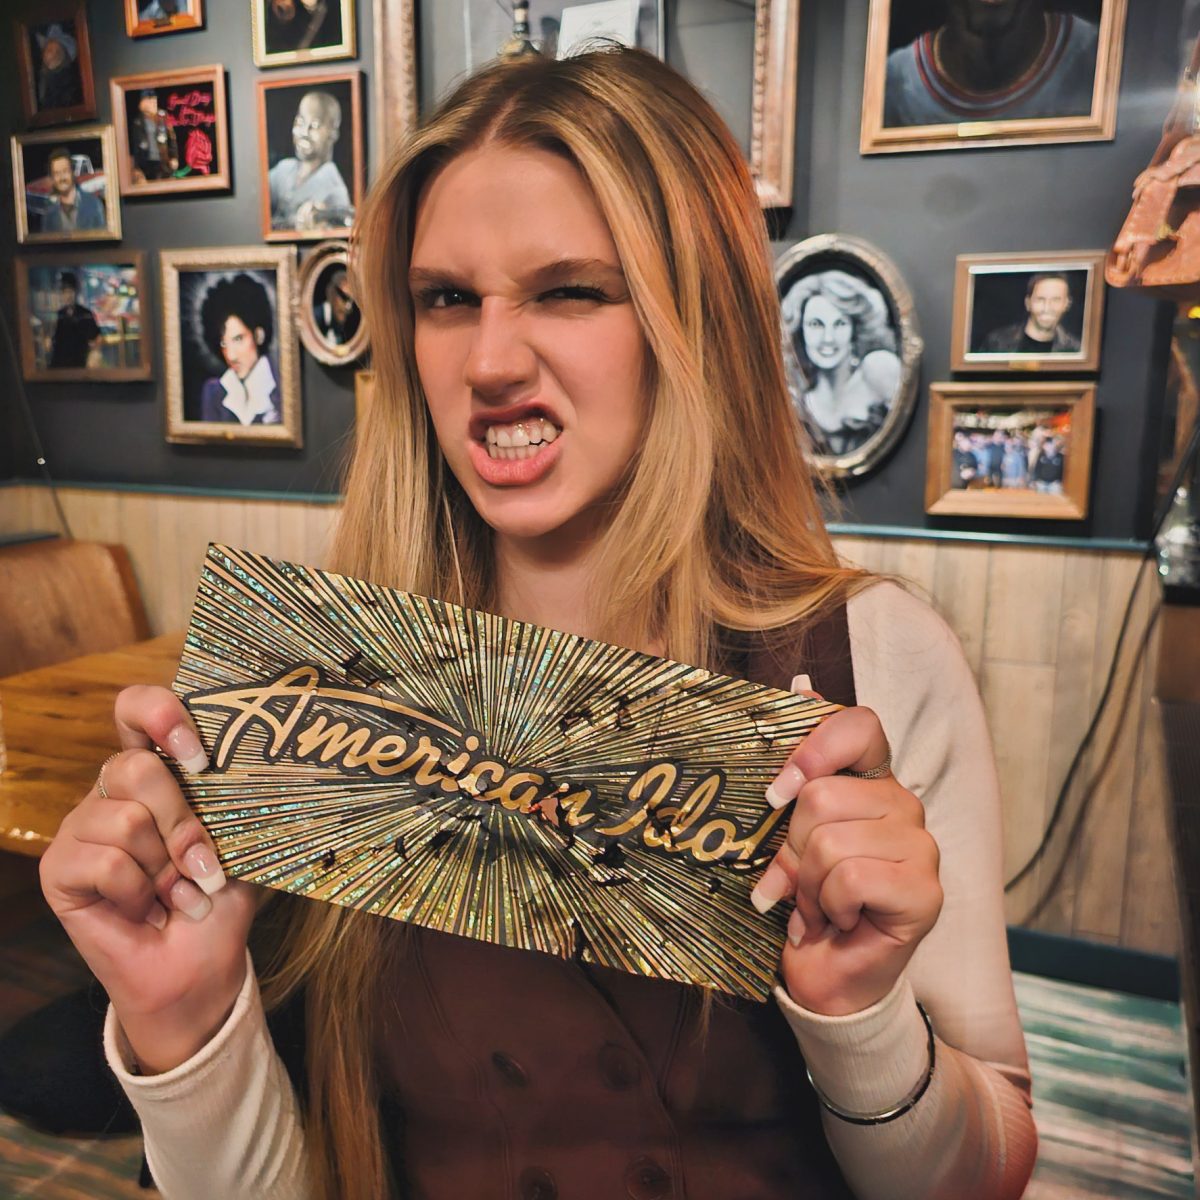 Johnson with her golden ticket that Bryan’s dog chewed up.